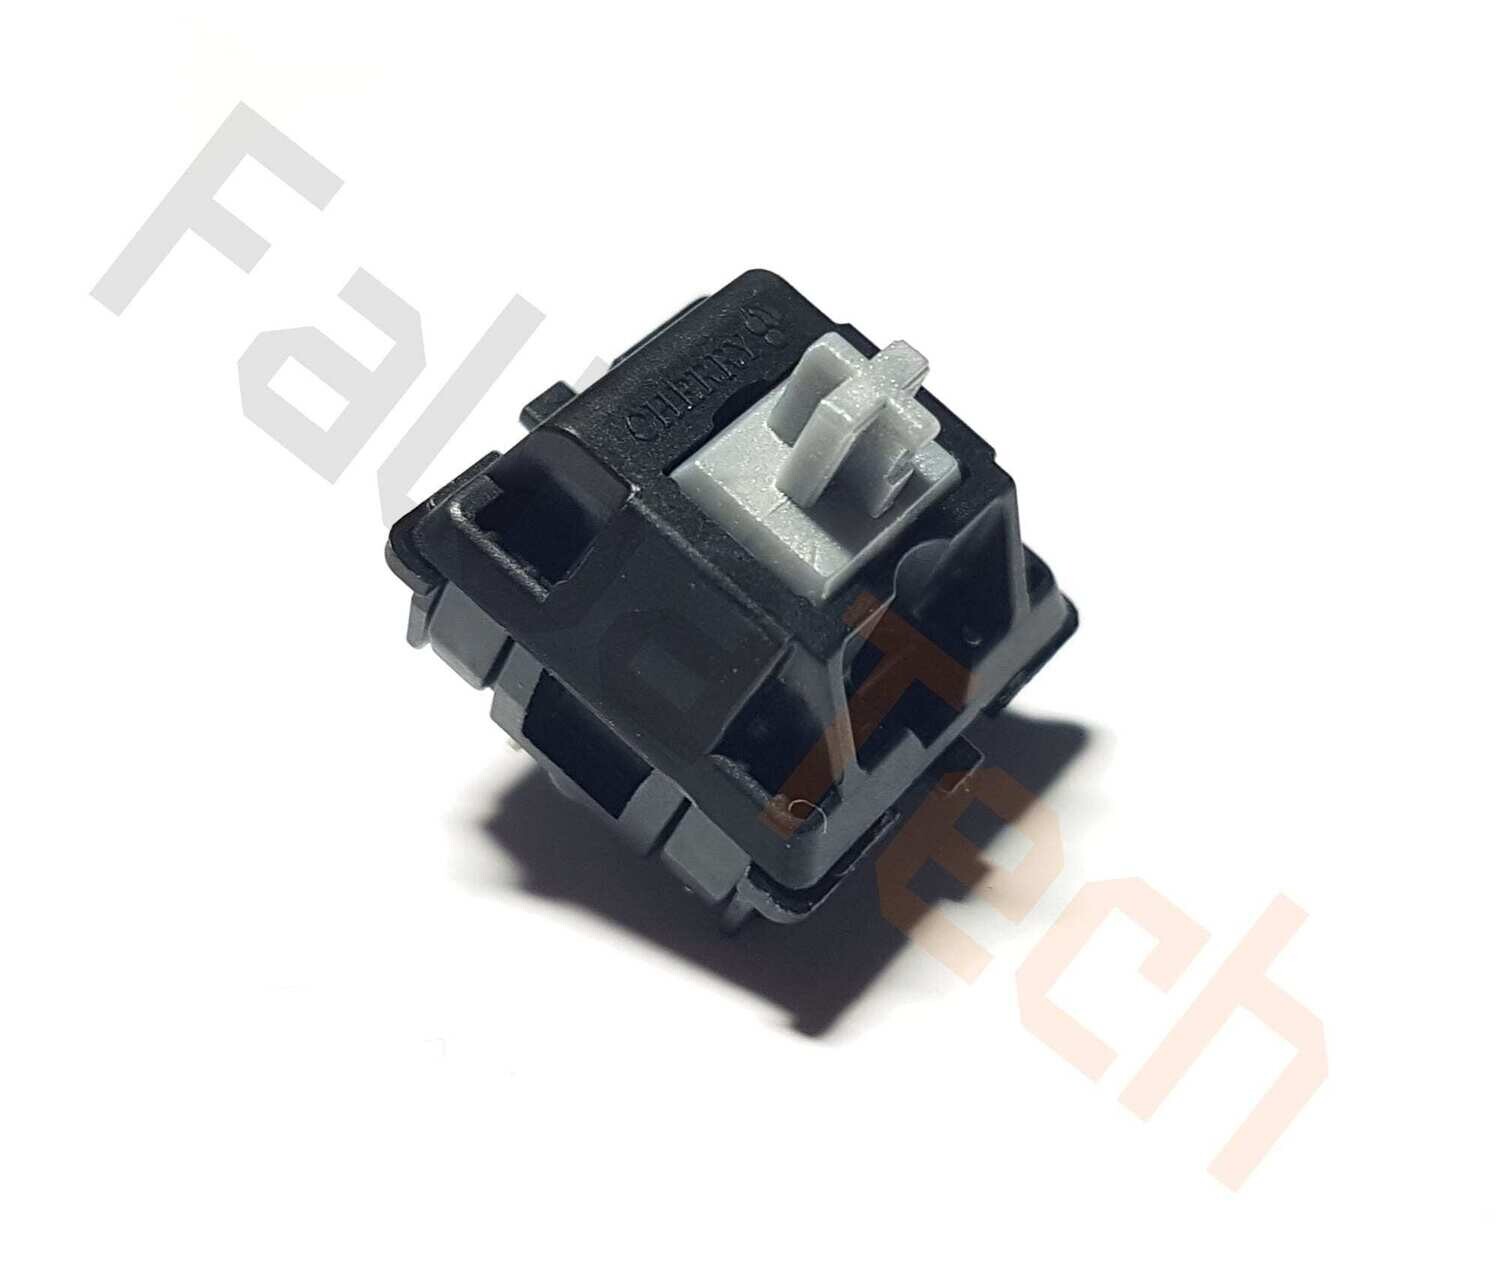 GH60 Key Switch Pack Cherry MX Silver Speed (Plate Mount)